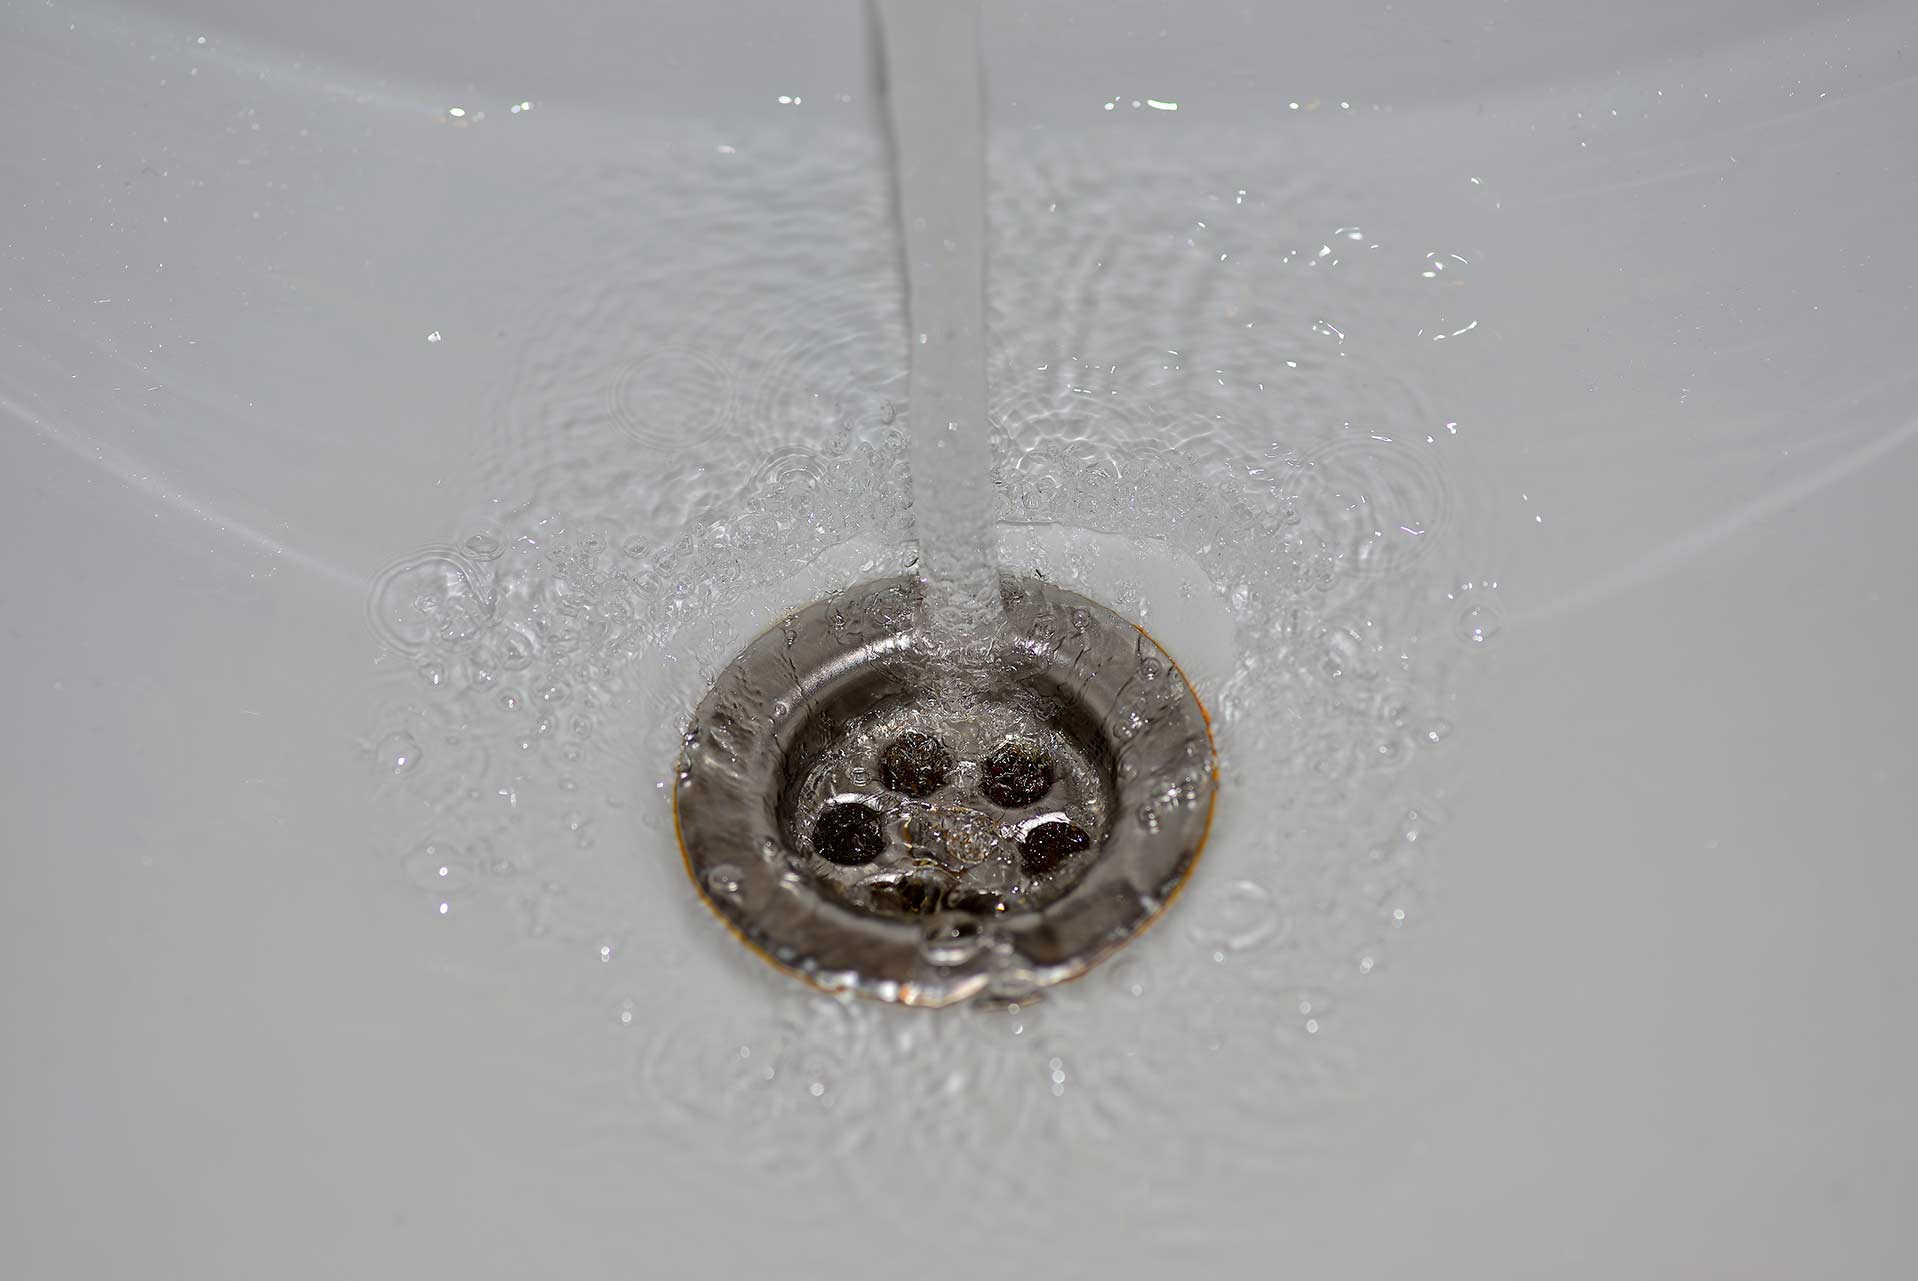 A2B Drains provides services to unblock blocked sinks and drains for properties in Limehouse.